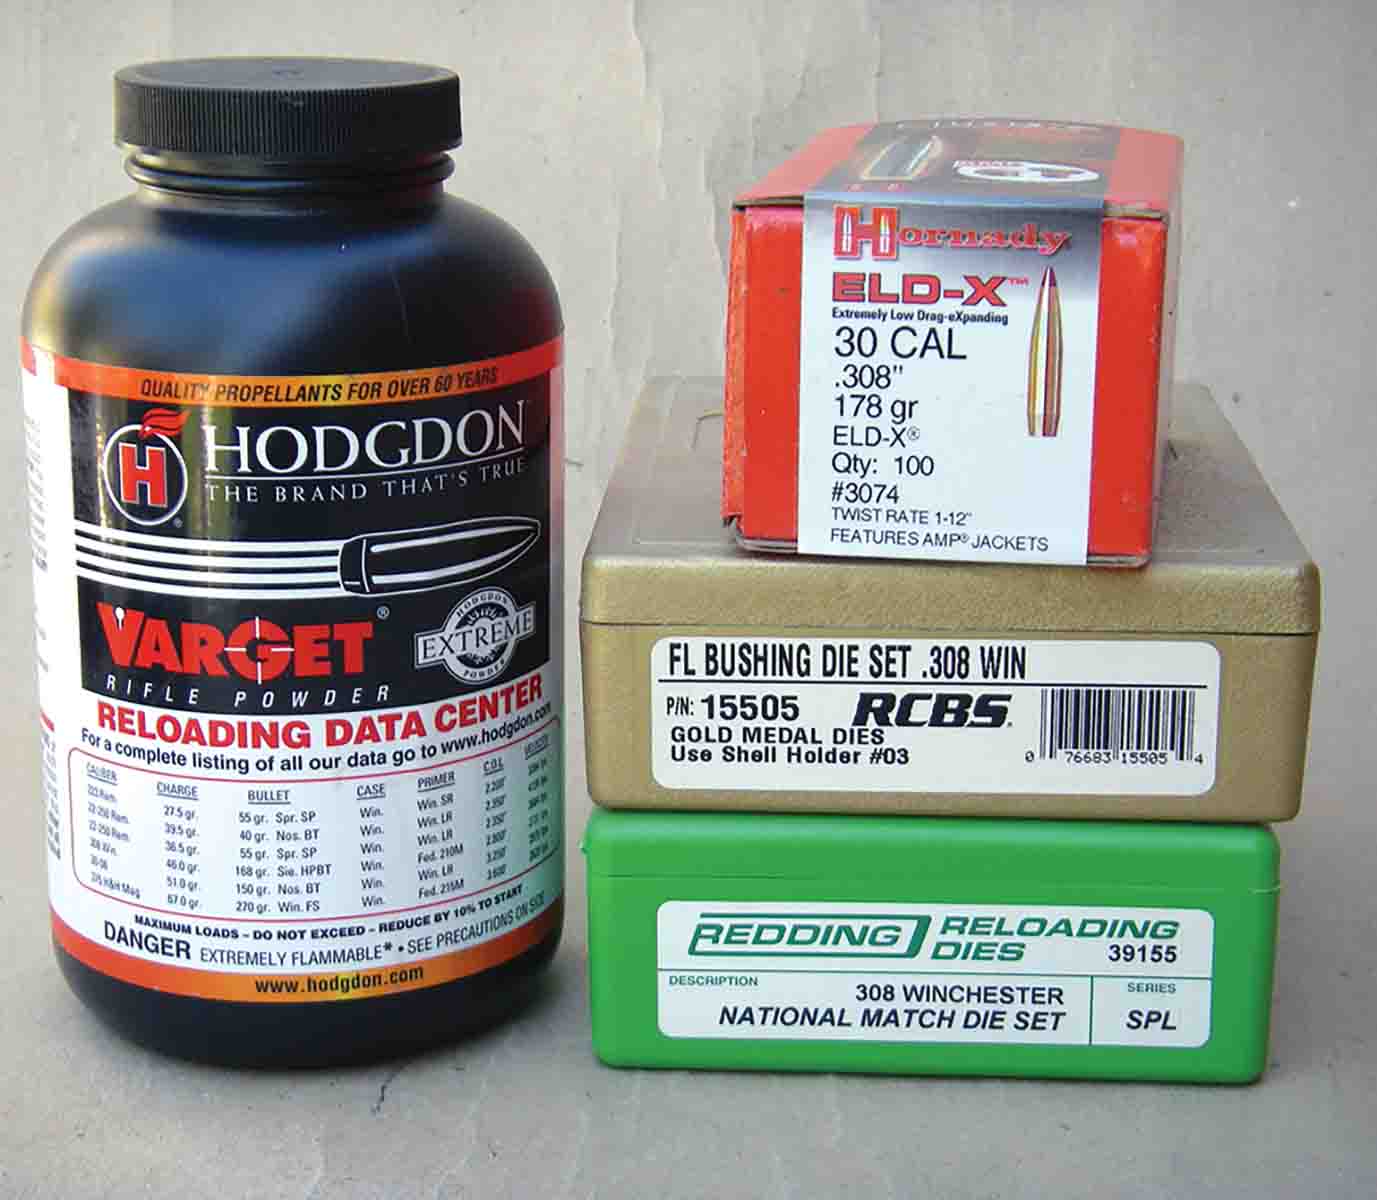 Hodgdon Varget is a top choice for assembling handloads in the .308 Winchester with Hornady 178-grain ELD-X bullets.